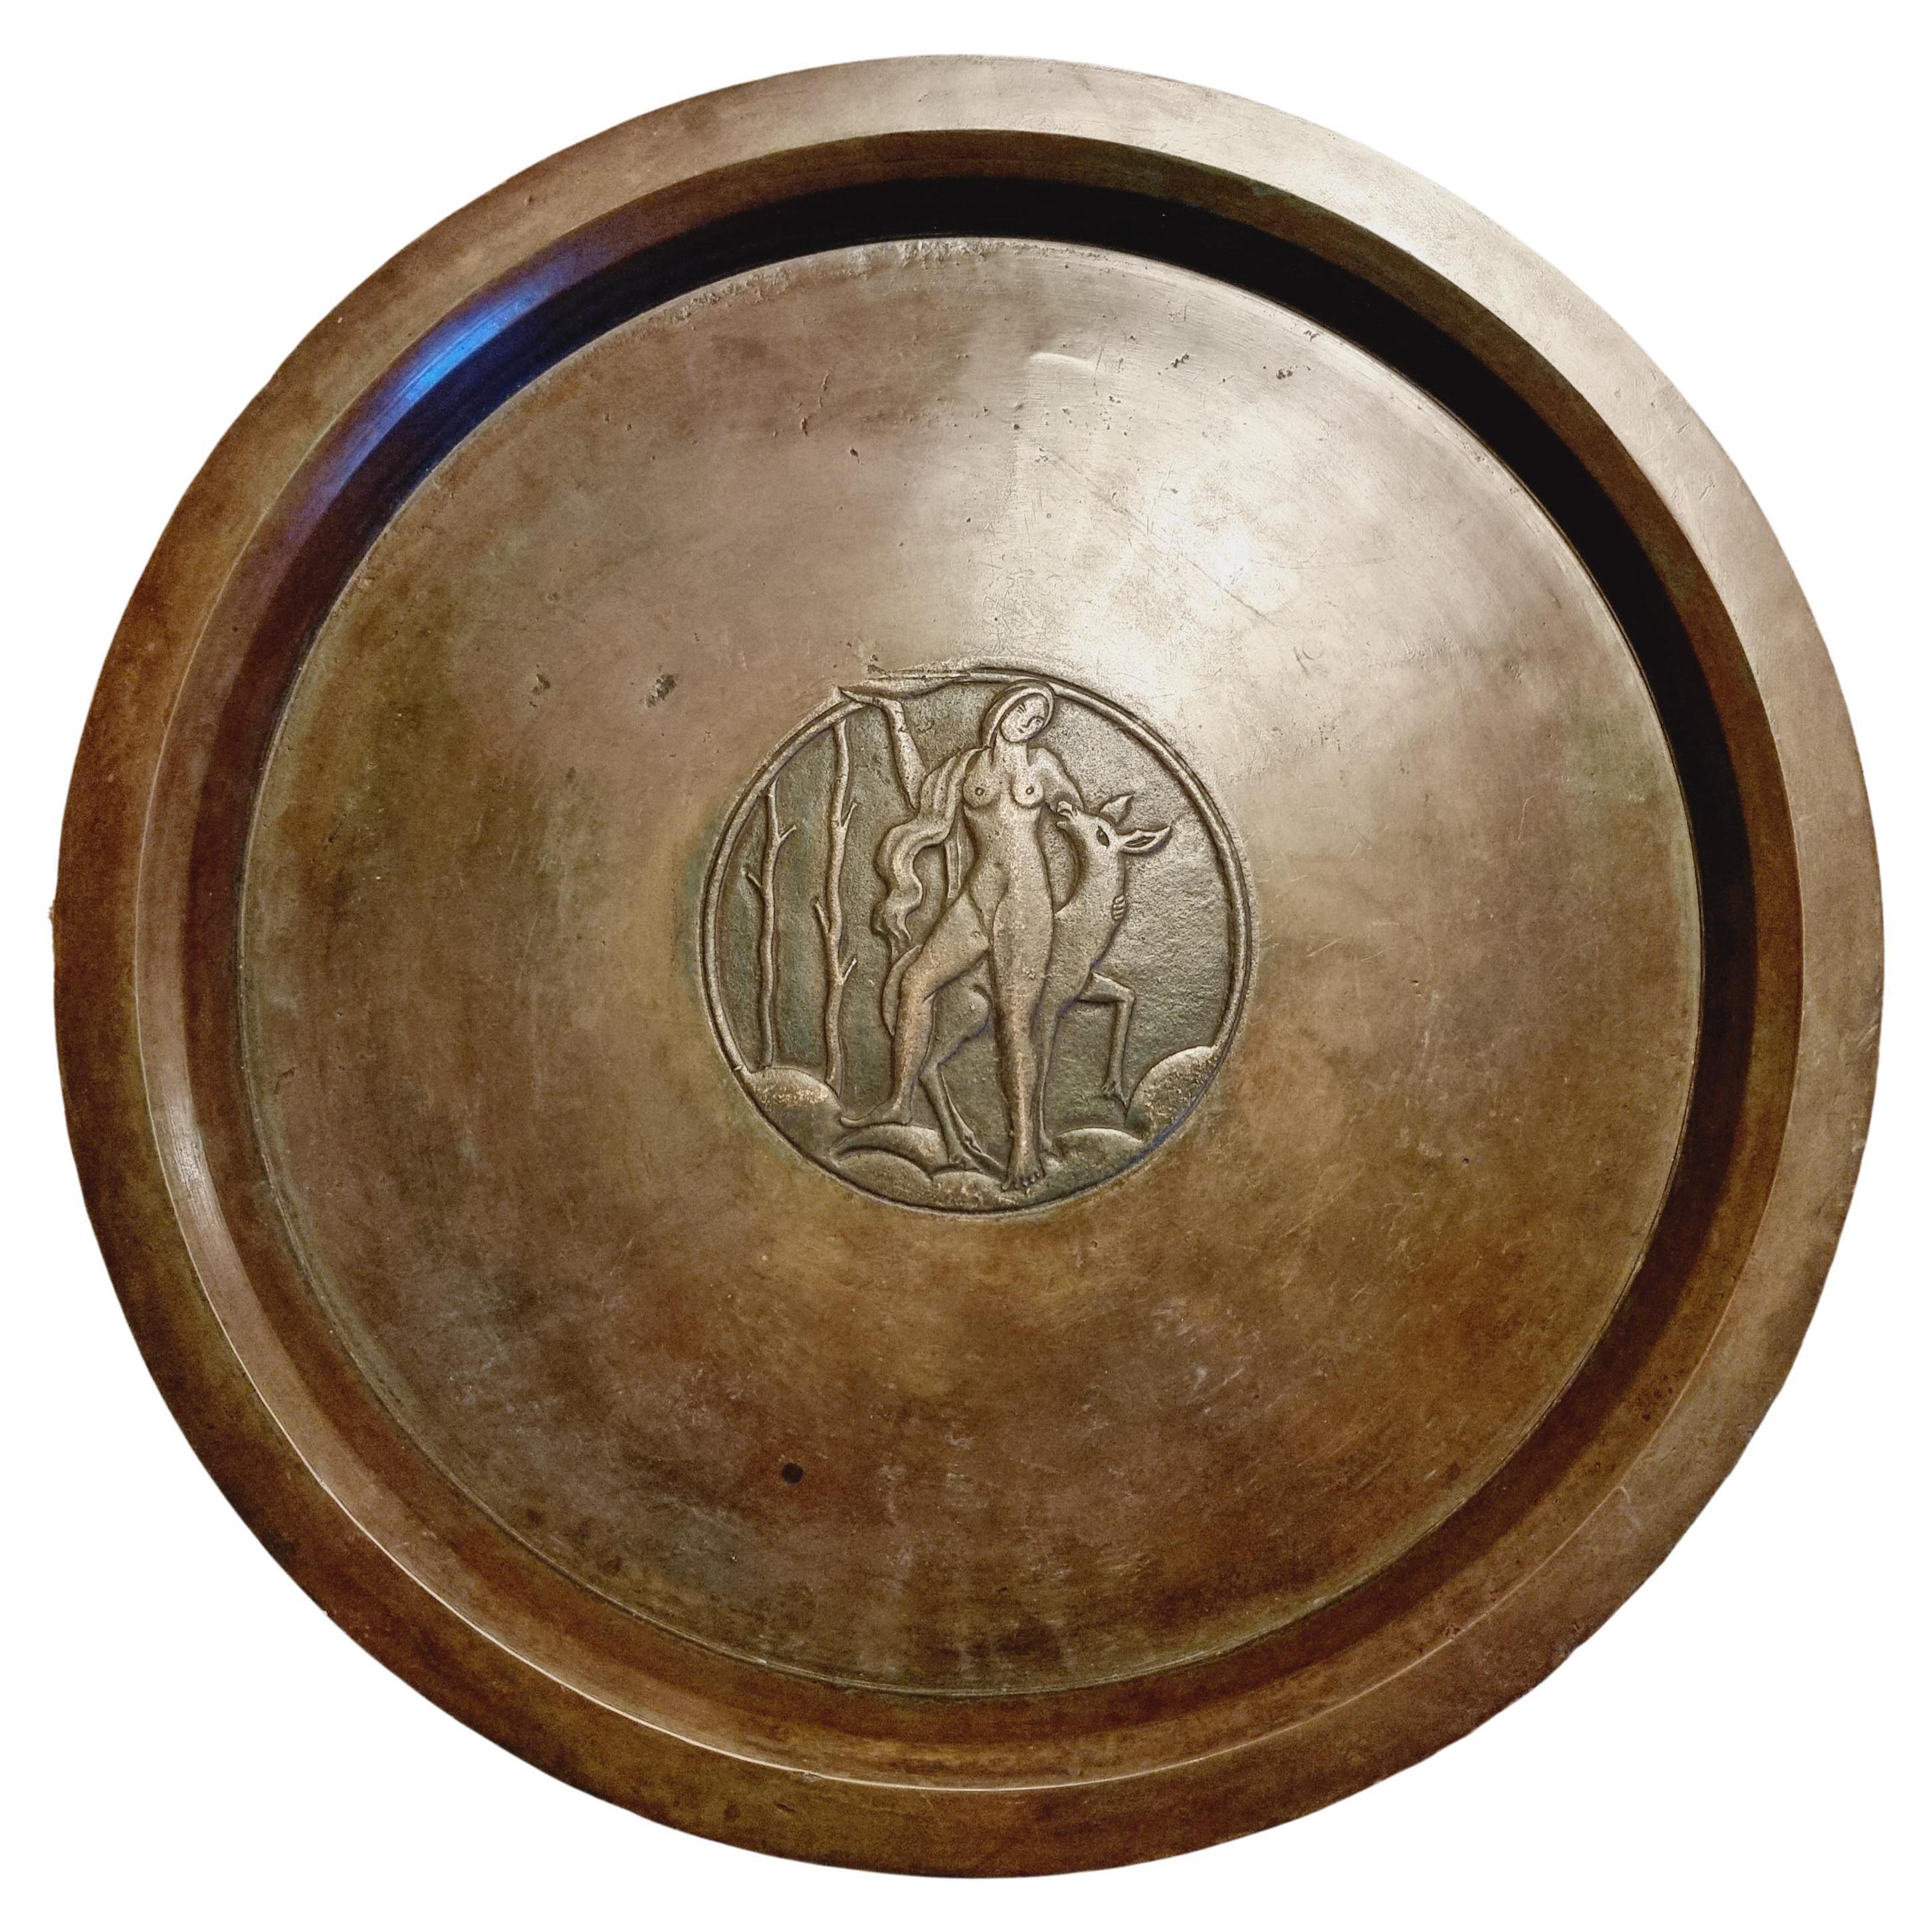 Rare solid bronze platter with decor of goddess of the wild and hunt Diana with a dear. Marked Sune Bäckström, Brons, 9032. 

Diam. 38.5 cm. 

Normal signs of age and wear. A few older, small dents, could be from manufacturing.